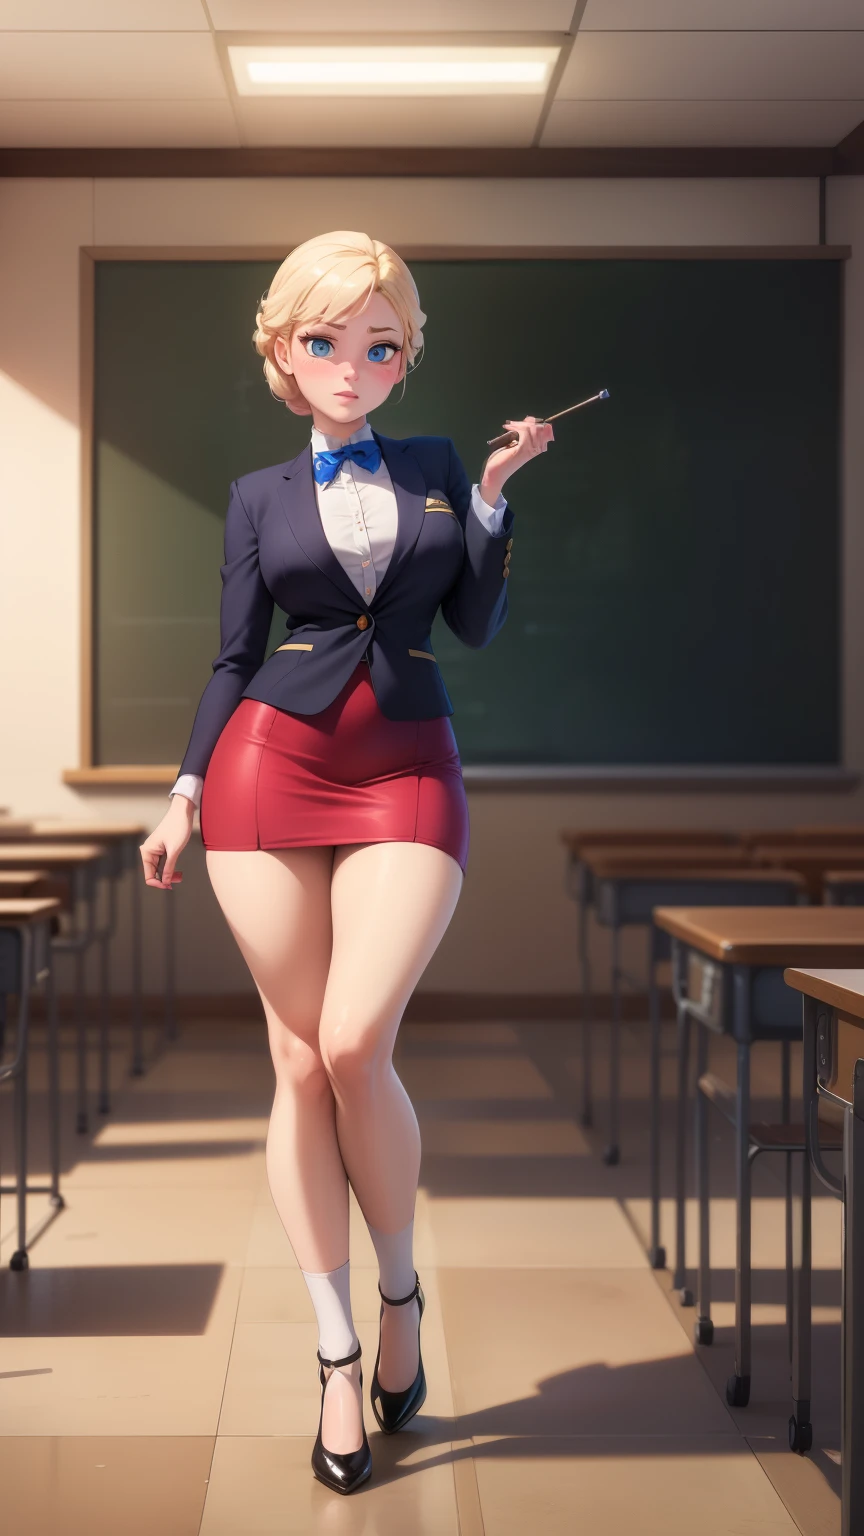 Shermie, ((masterpiece, highest quality)), Full body view, Bursting breasts, Fine skin, Anna from Frozen is your teacher, In the classroom, High heels, socks, Elegant teacher suit, Above the knee skirt, Very detailed, Cinema Lighting, Ultra-realistic, blush, Looking at the viewers, Anna, Anna from the movie
